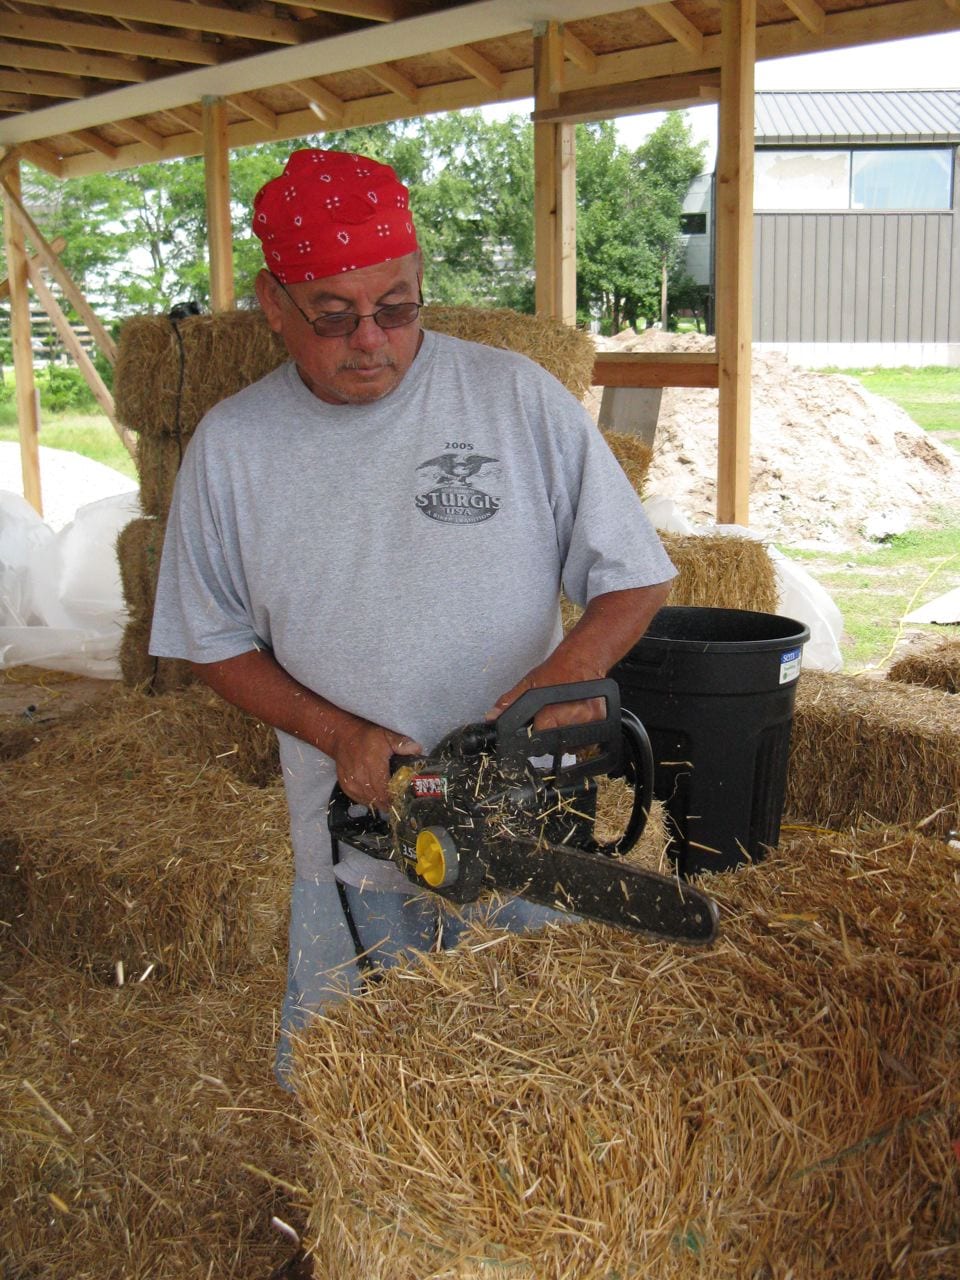 Leonard (Lenny) Lone Hill is shown carving a notch for a post with a chainsaw. He is a building trades instructor at Oglala Lakota College at the Pine Ridge Reservation and is one of the participants completing the 12 credit certificate in straw bale building taught by Laura Bartels.